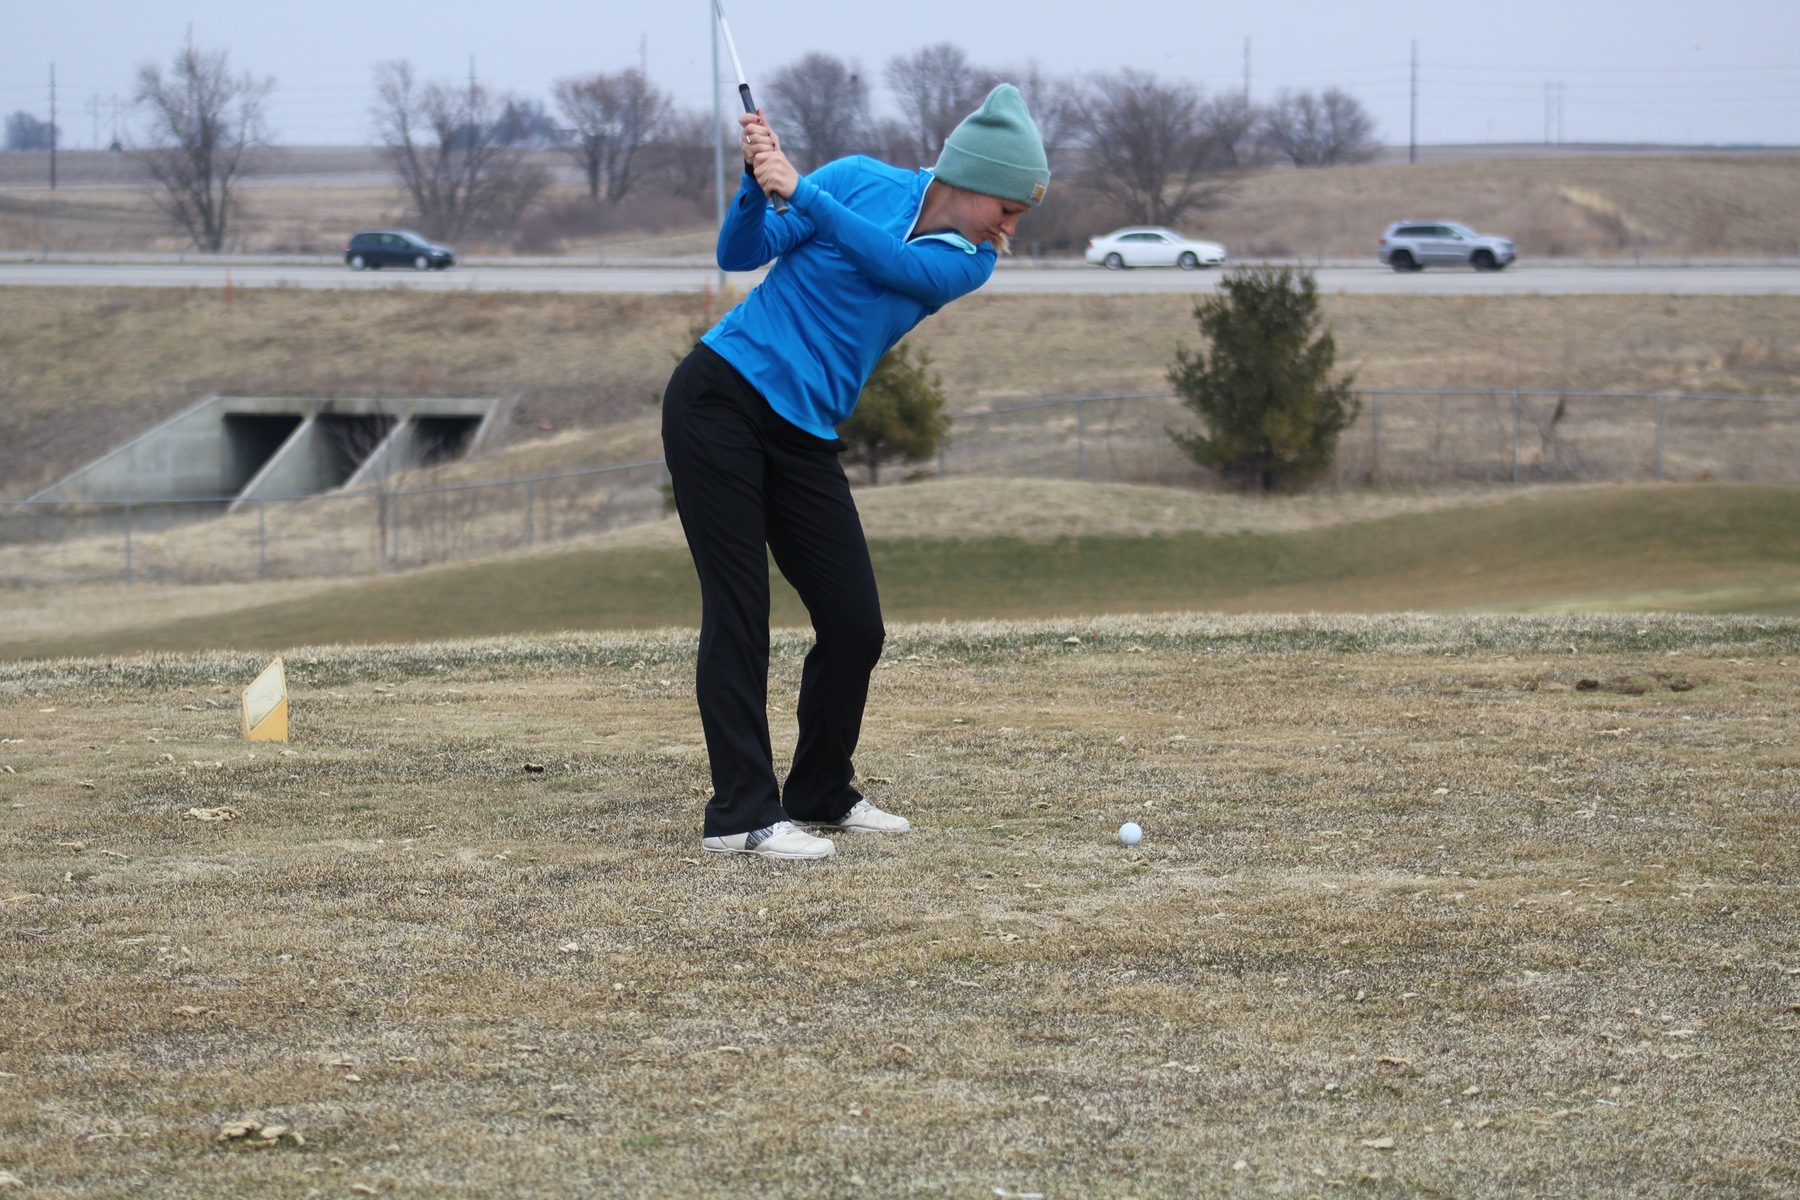 NIACC sophomore Courtney Tusler tees off on a par 3 Thursday at Otter Creek Golf Course in Ankeny.